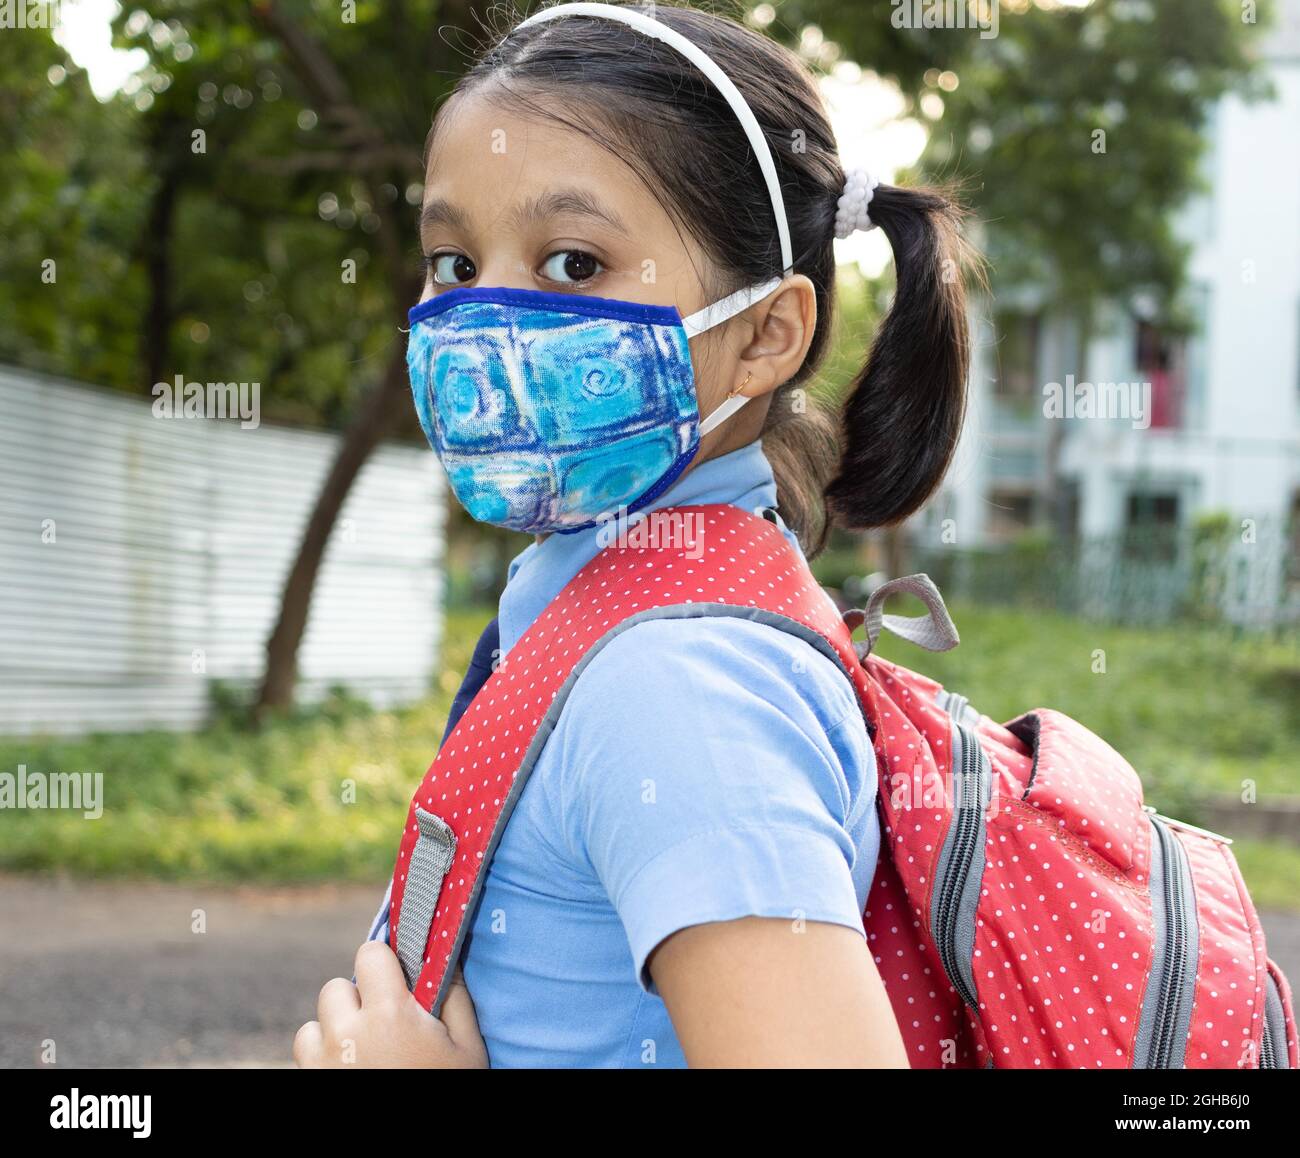 Close up of a happy Indian girl child student in blue school uniform with red bag and nose mask protection going to school Stock Photo